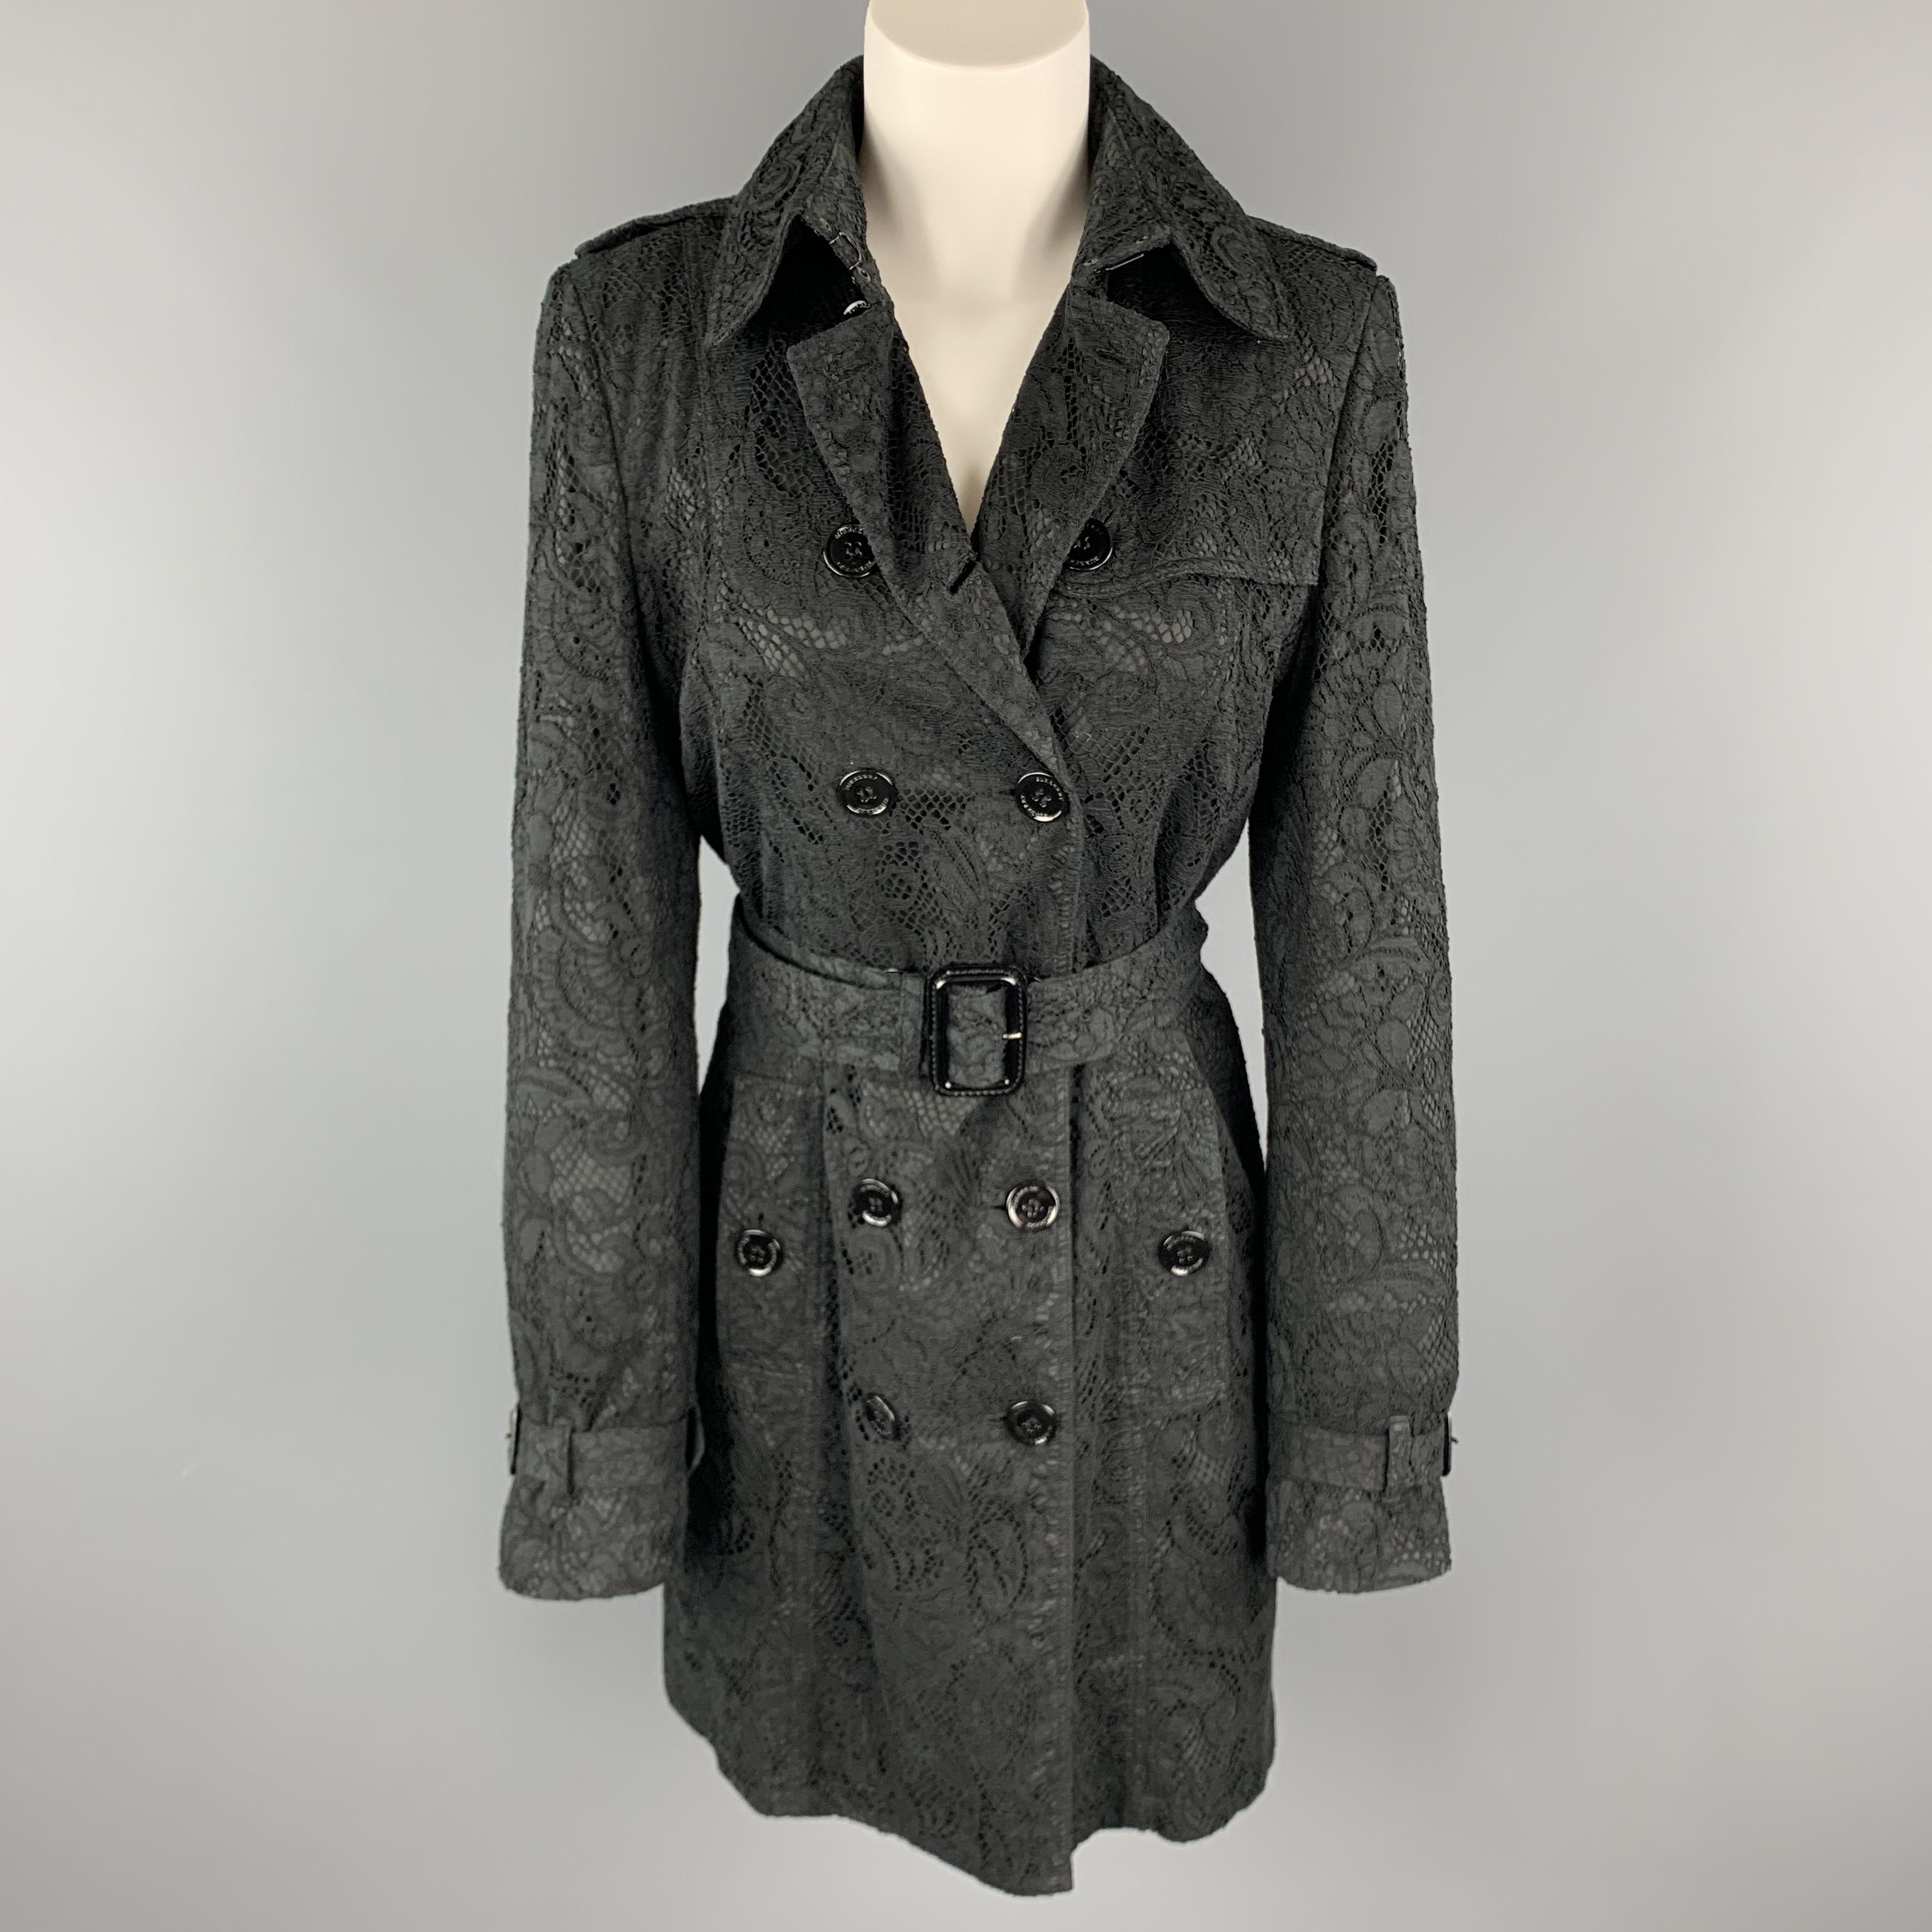 BURBERRY LONDON trench coat comes in a black lace overlay fabric with a double breasted button front, storm flap, epaulets, and belted waist and cuffs. Made in Poland.

Excellent Pre-Owned Condition.
Marked: M

Measurements:

Shoulder: 16 in.
Bust: